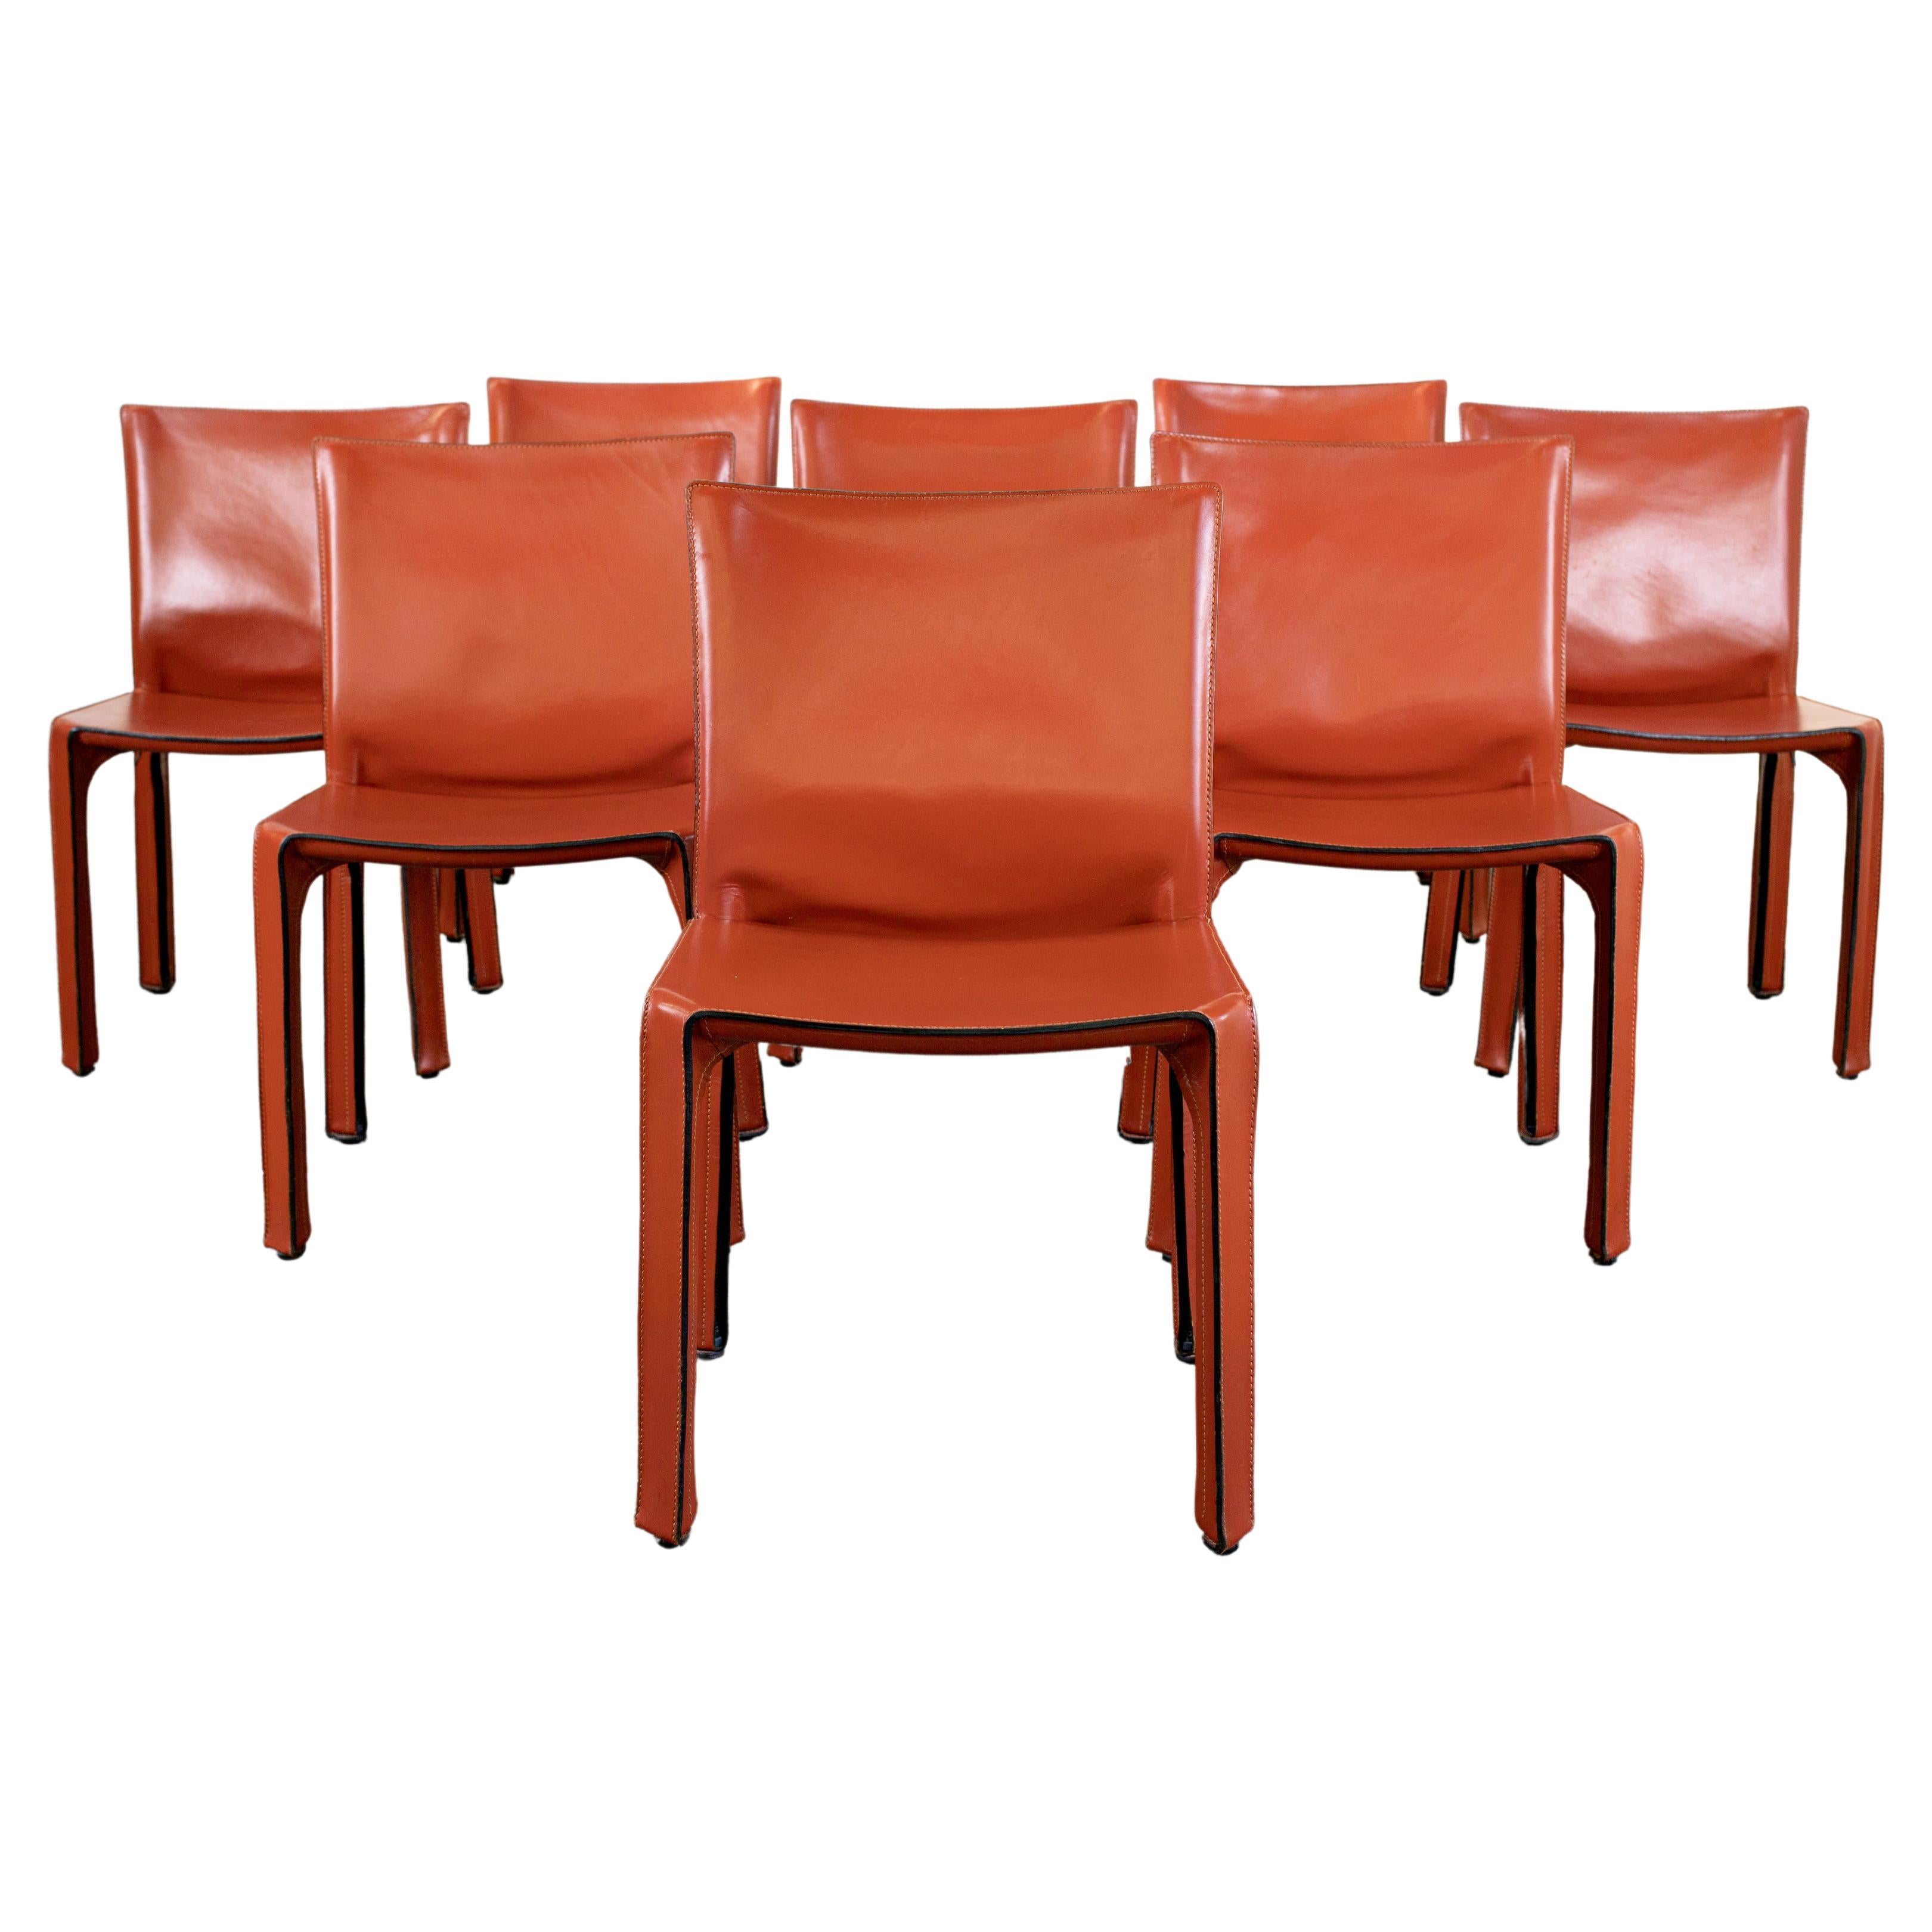 8 Early 1980s Mario Bellini CAB 412 Chairs in Russian Red Leather for Cassina